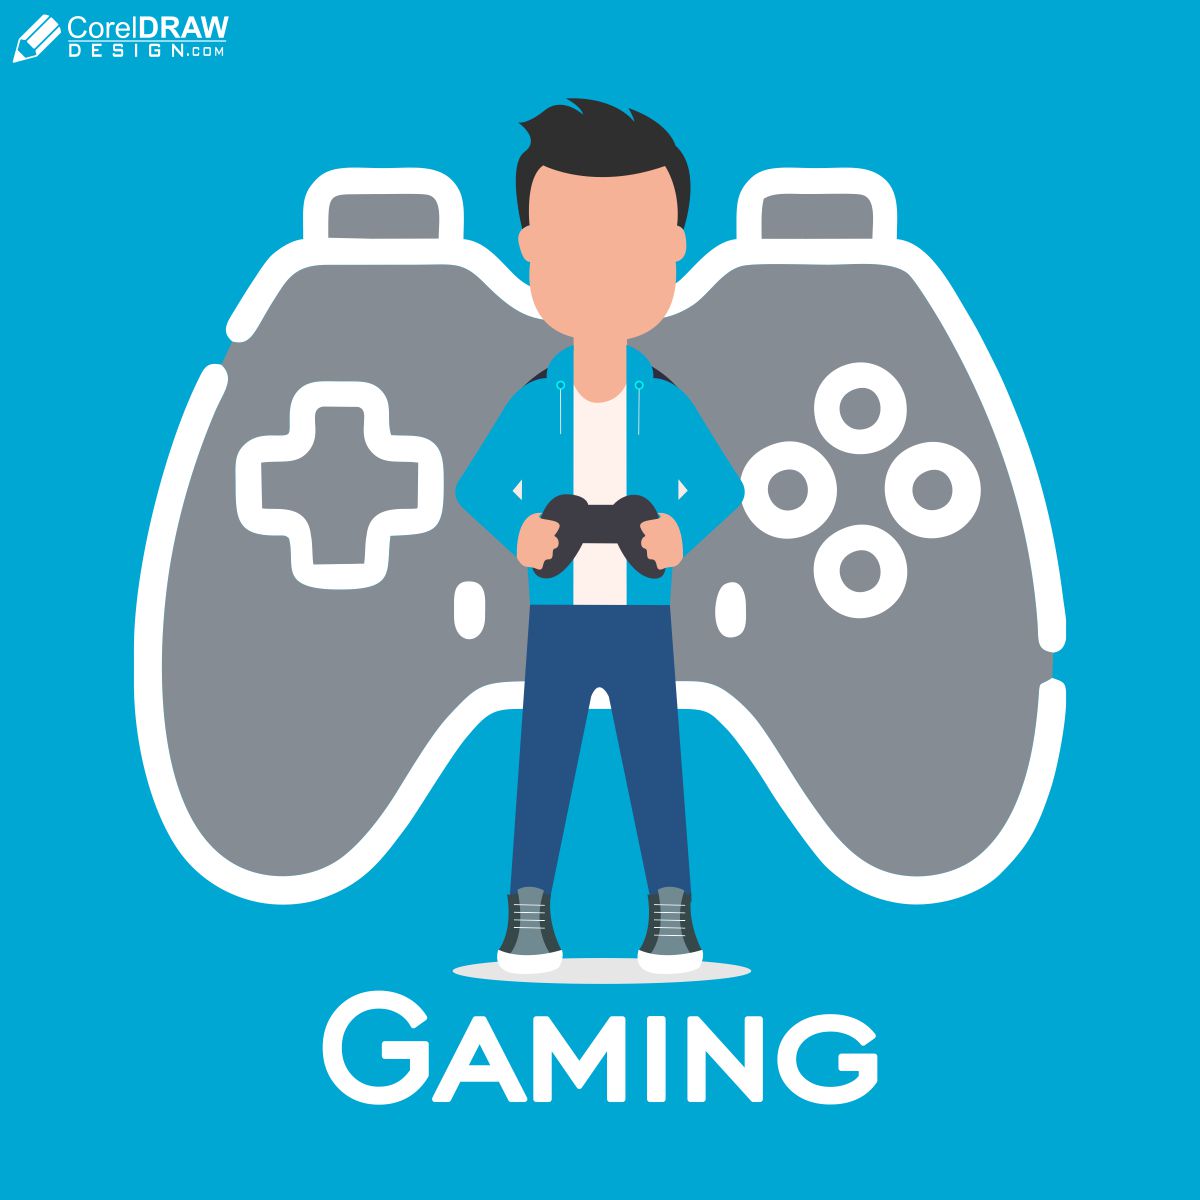 Gaming poster Vectors & Illustrations for Free Download